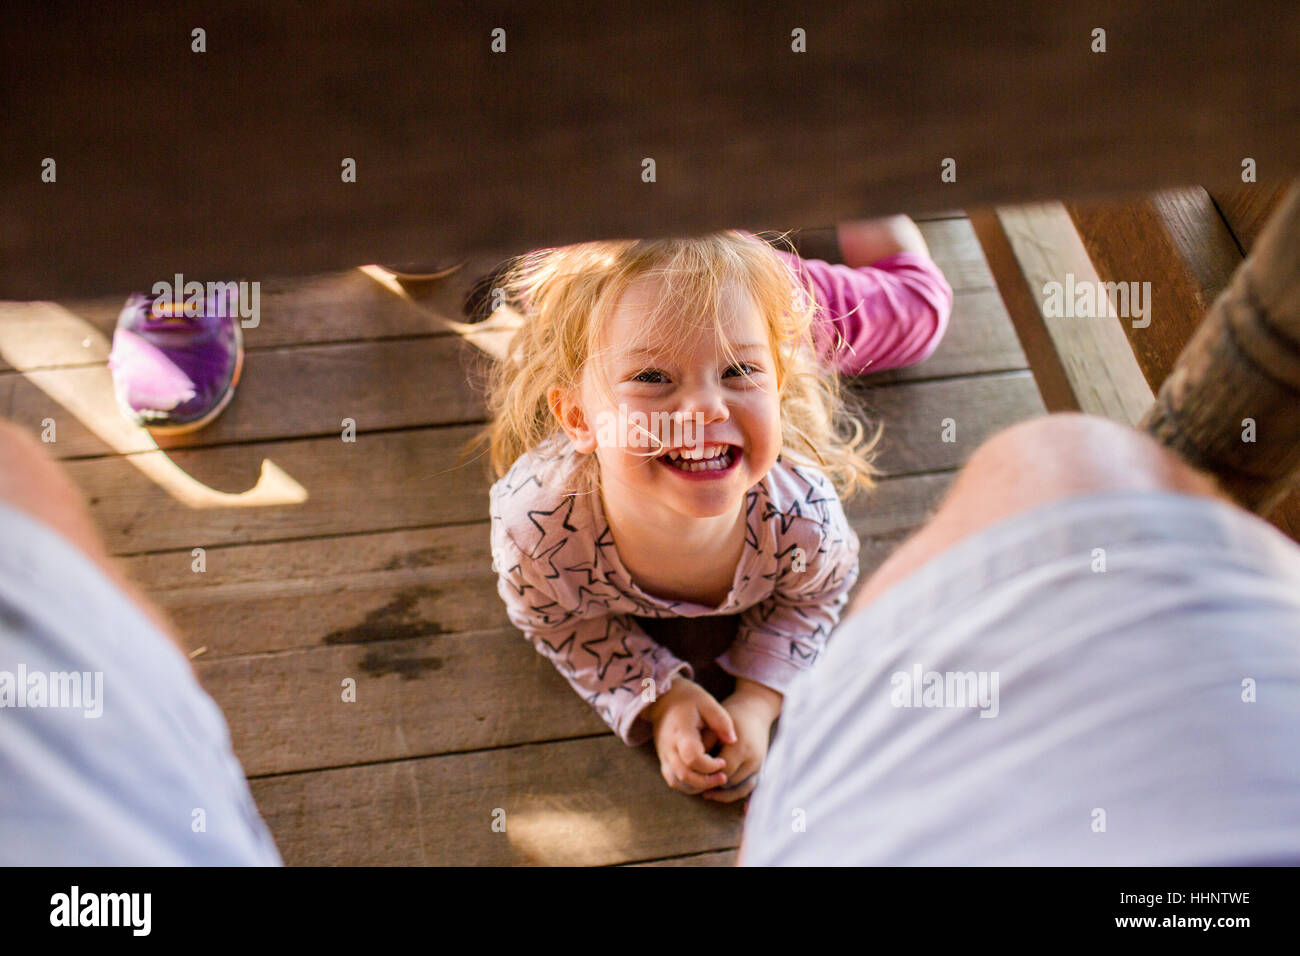 Portrait of smiling Caucasian girl laying underneath table Stock Photo